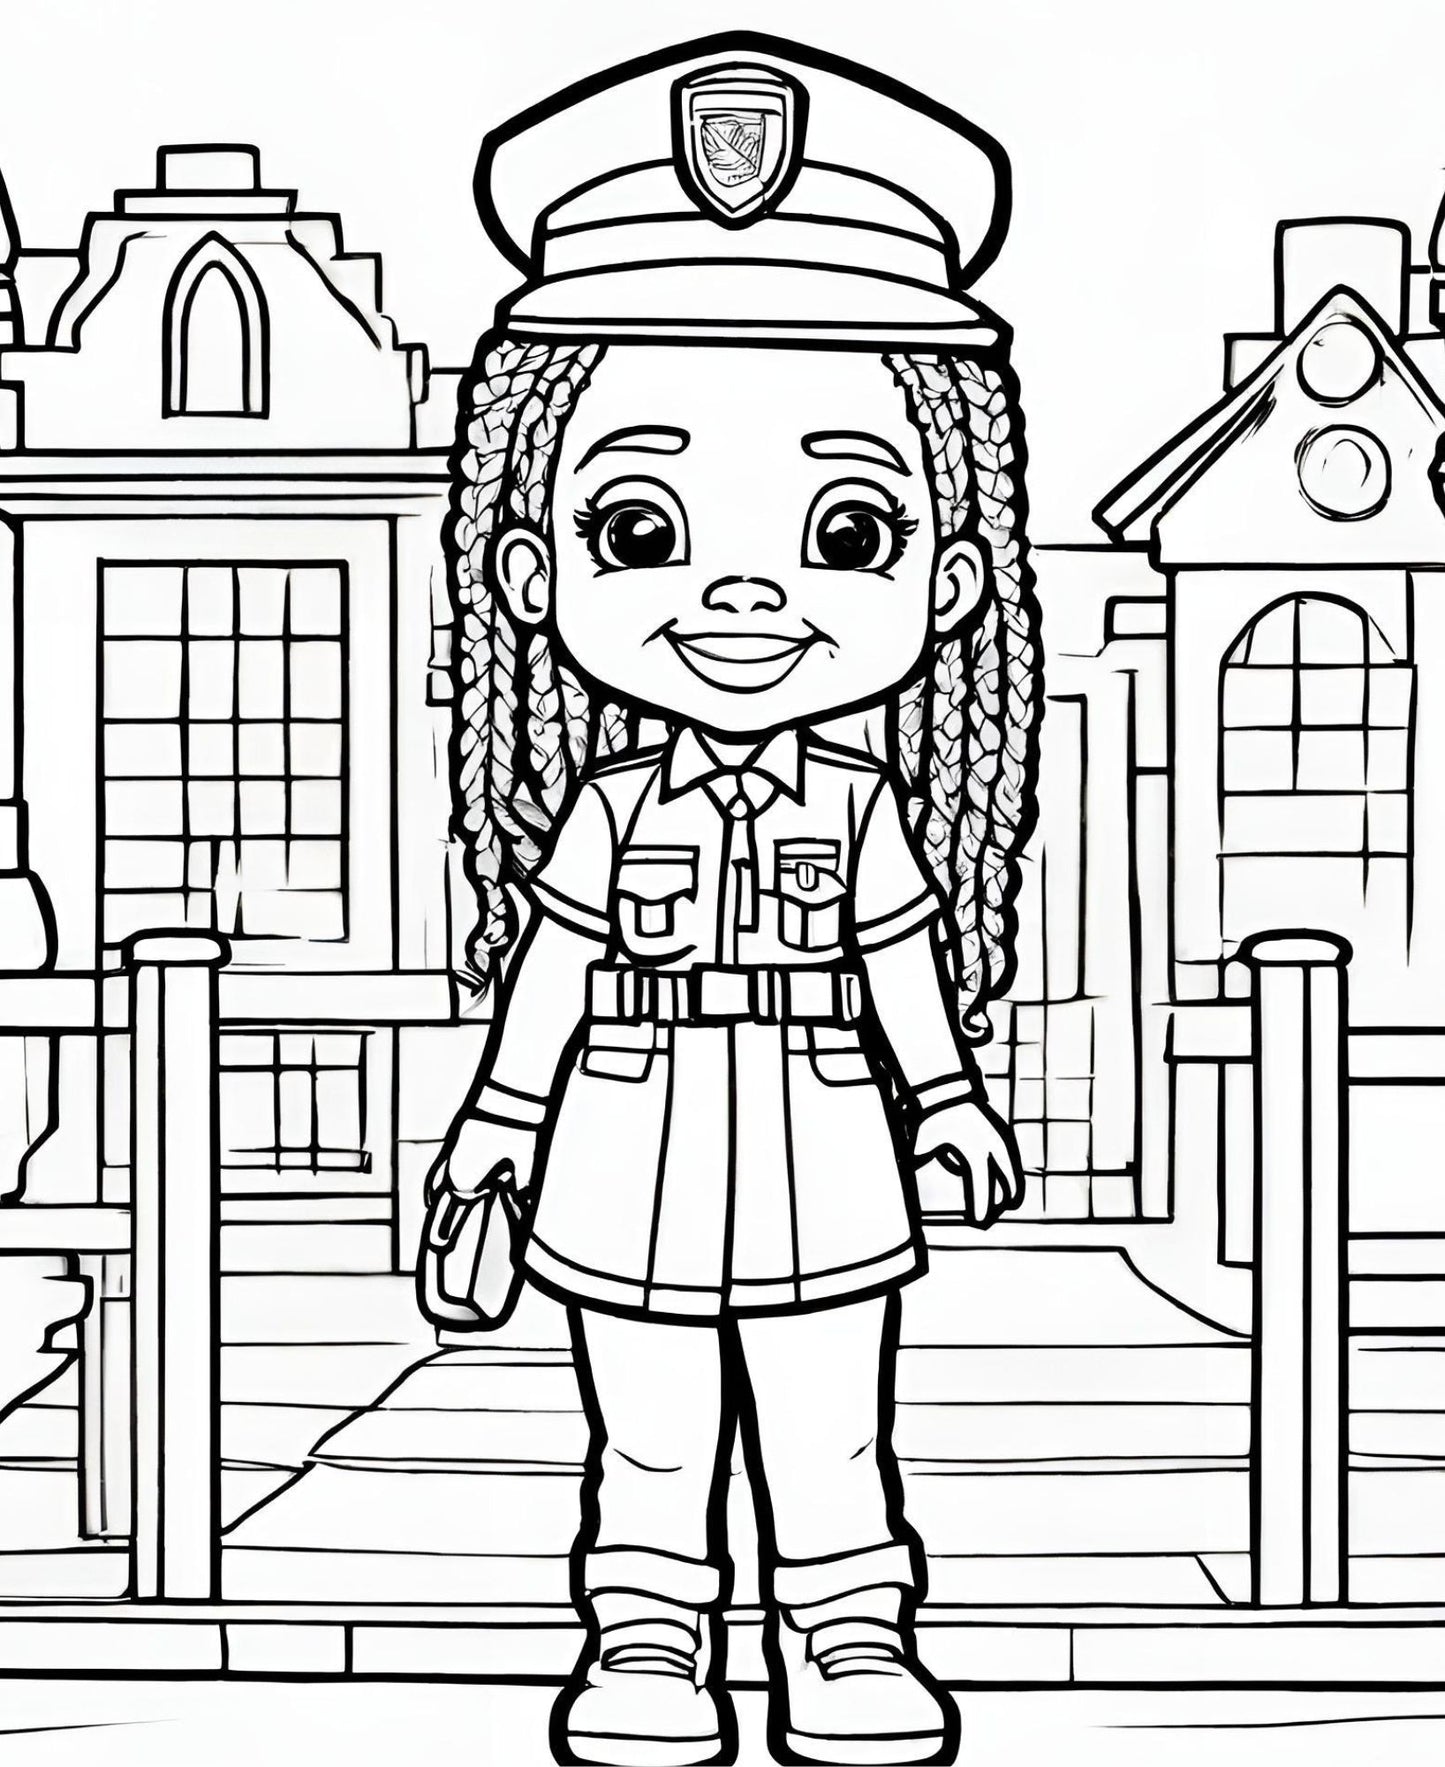 A Coloring Book that Looks like Me! - Paper Back and Hardcopy©️